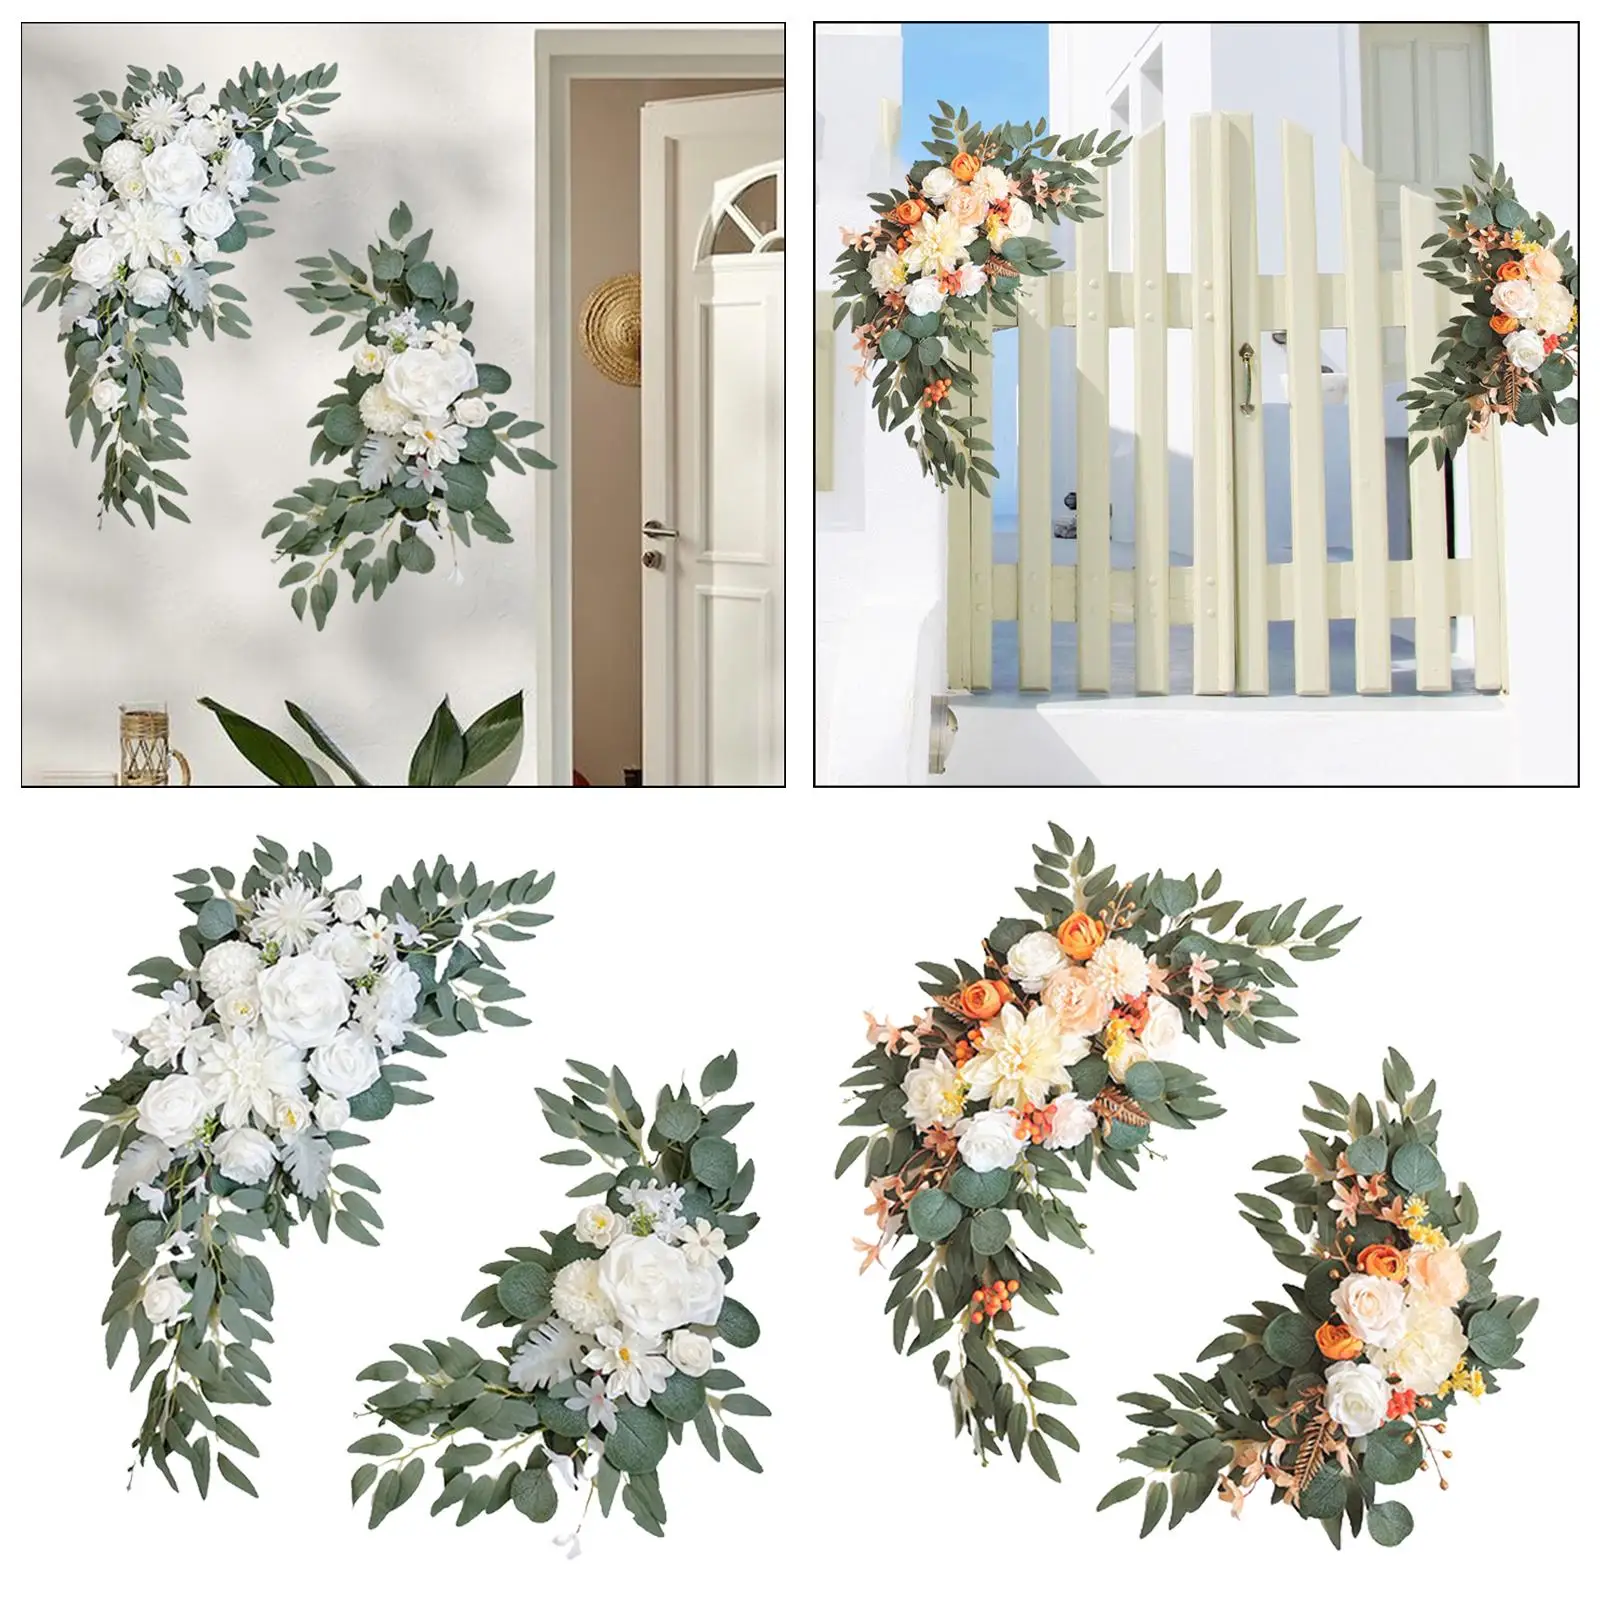 Artificial Wedding Arch Flowers Rose Flower Swag Handcrafted for Ceremony and Reception Backdrop Decoration Elegant Welcome Sign